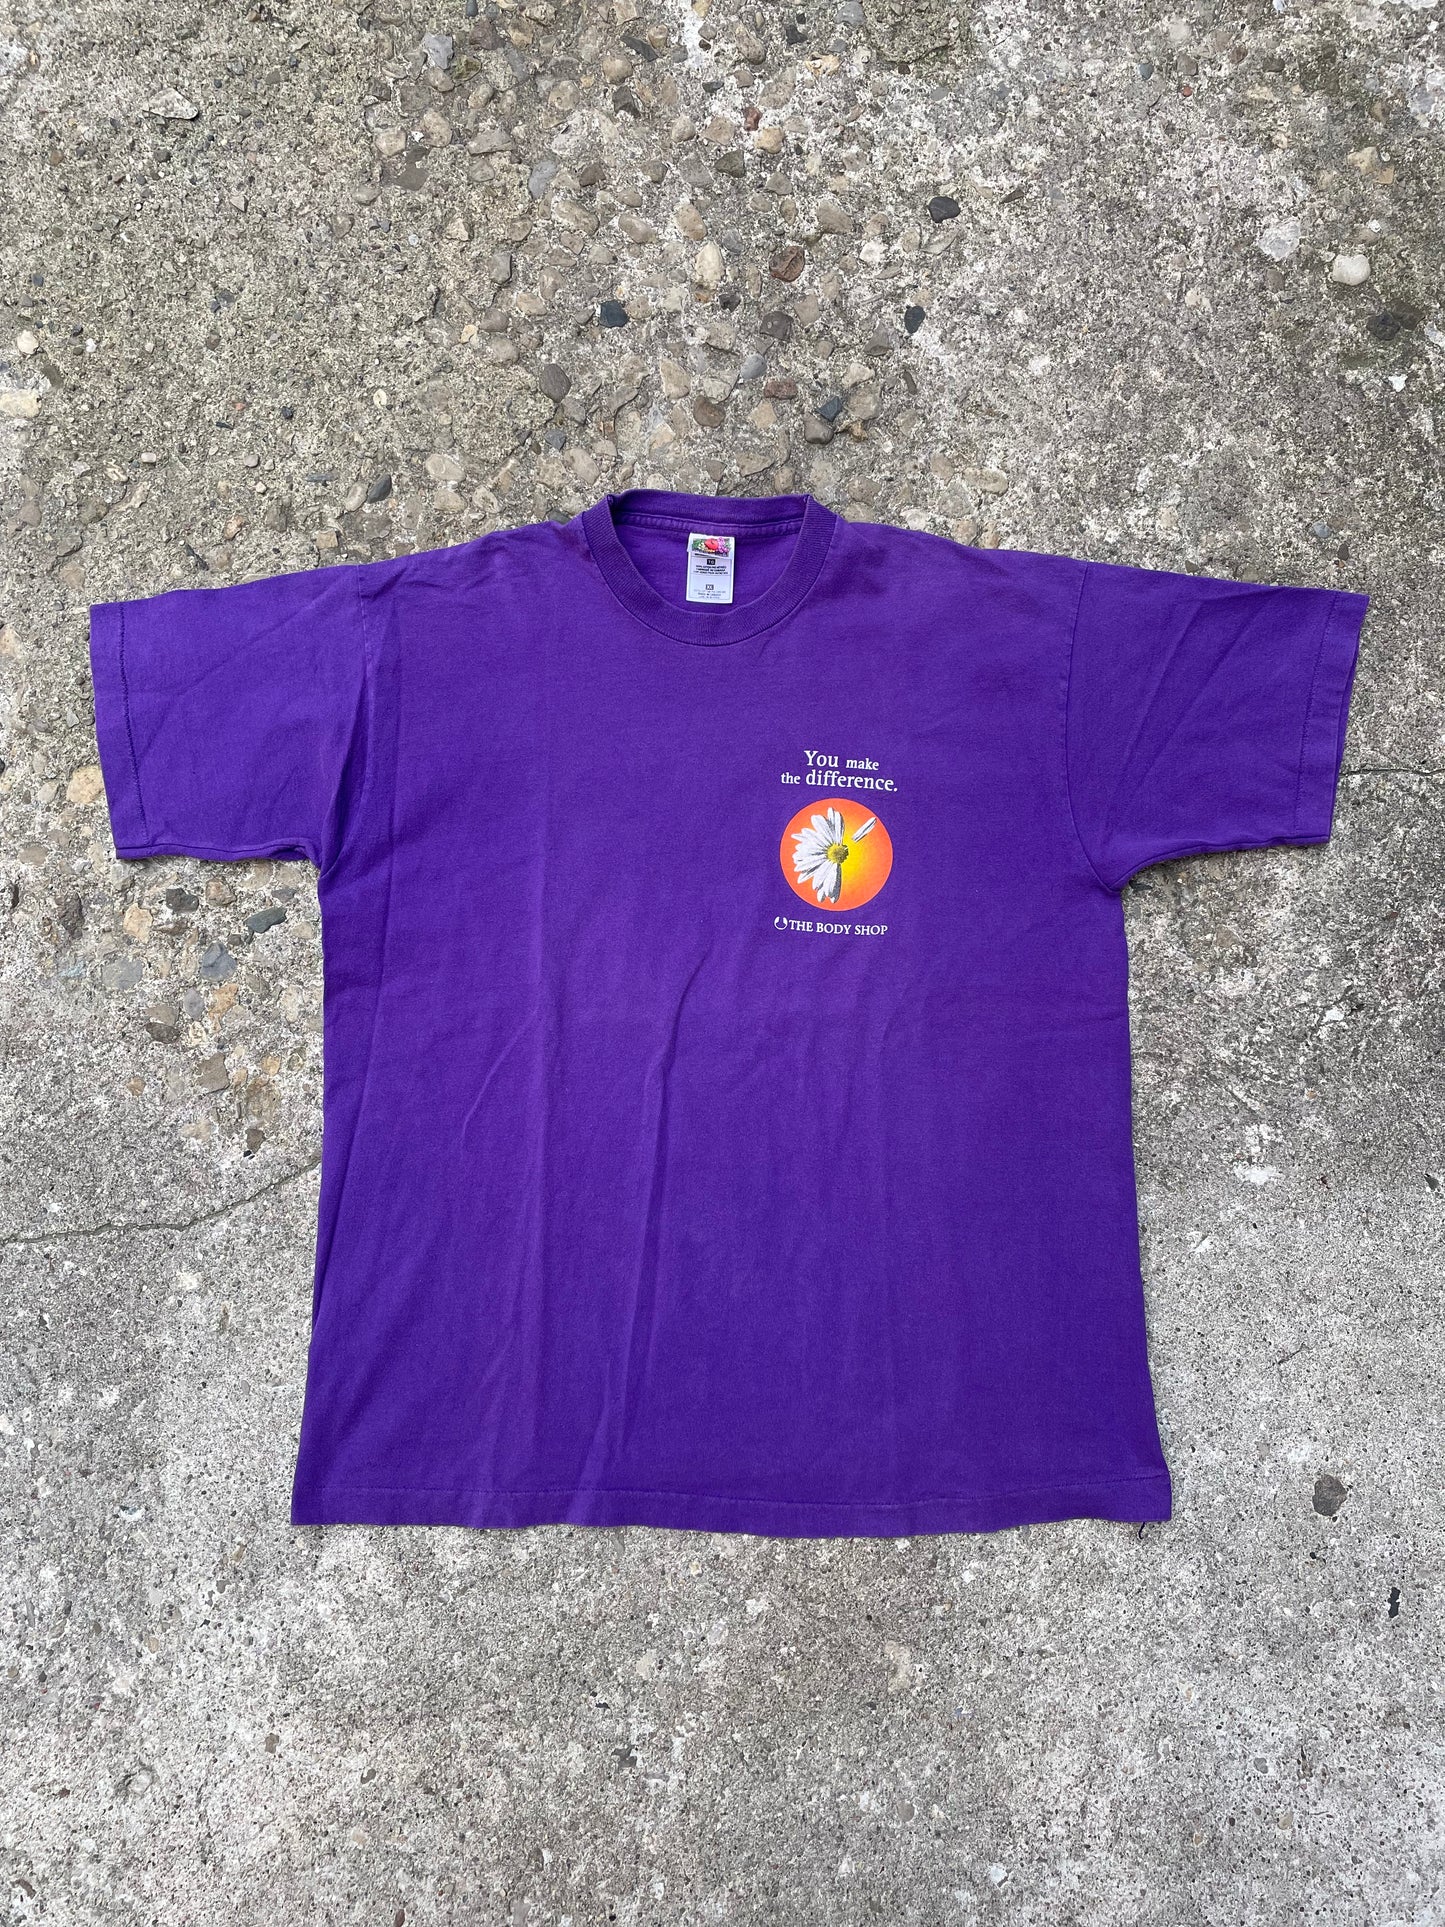 1990's 'You Make The Difference' The Body Shop Graphic T-Shirt - XL